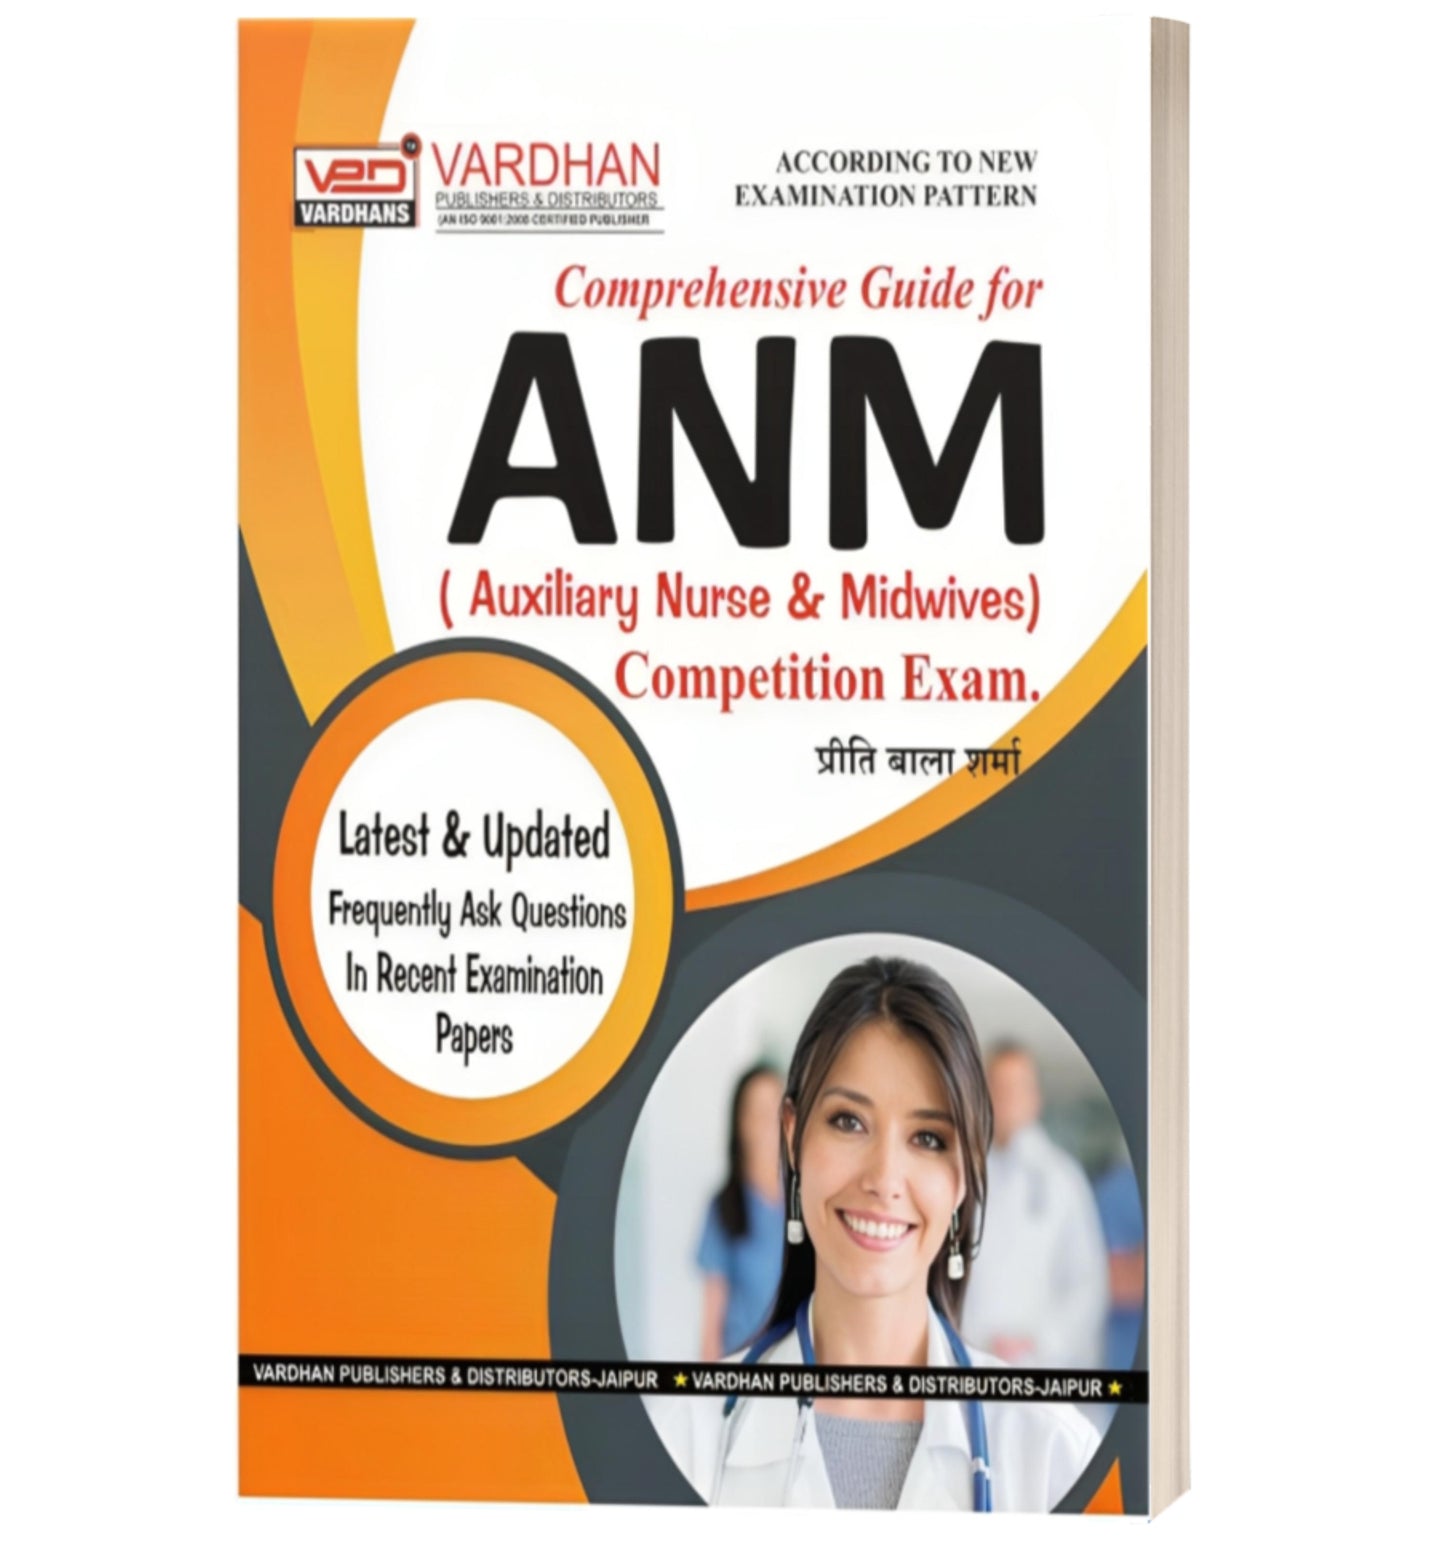 Comprehensive Guide for ANM Competition Exam.